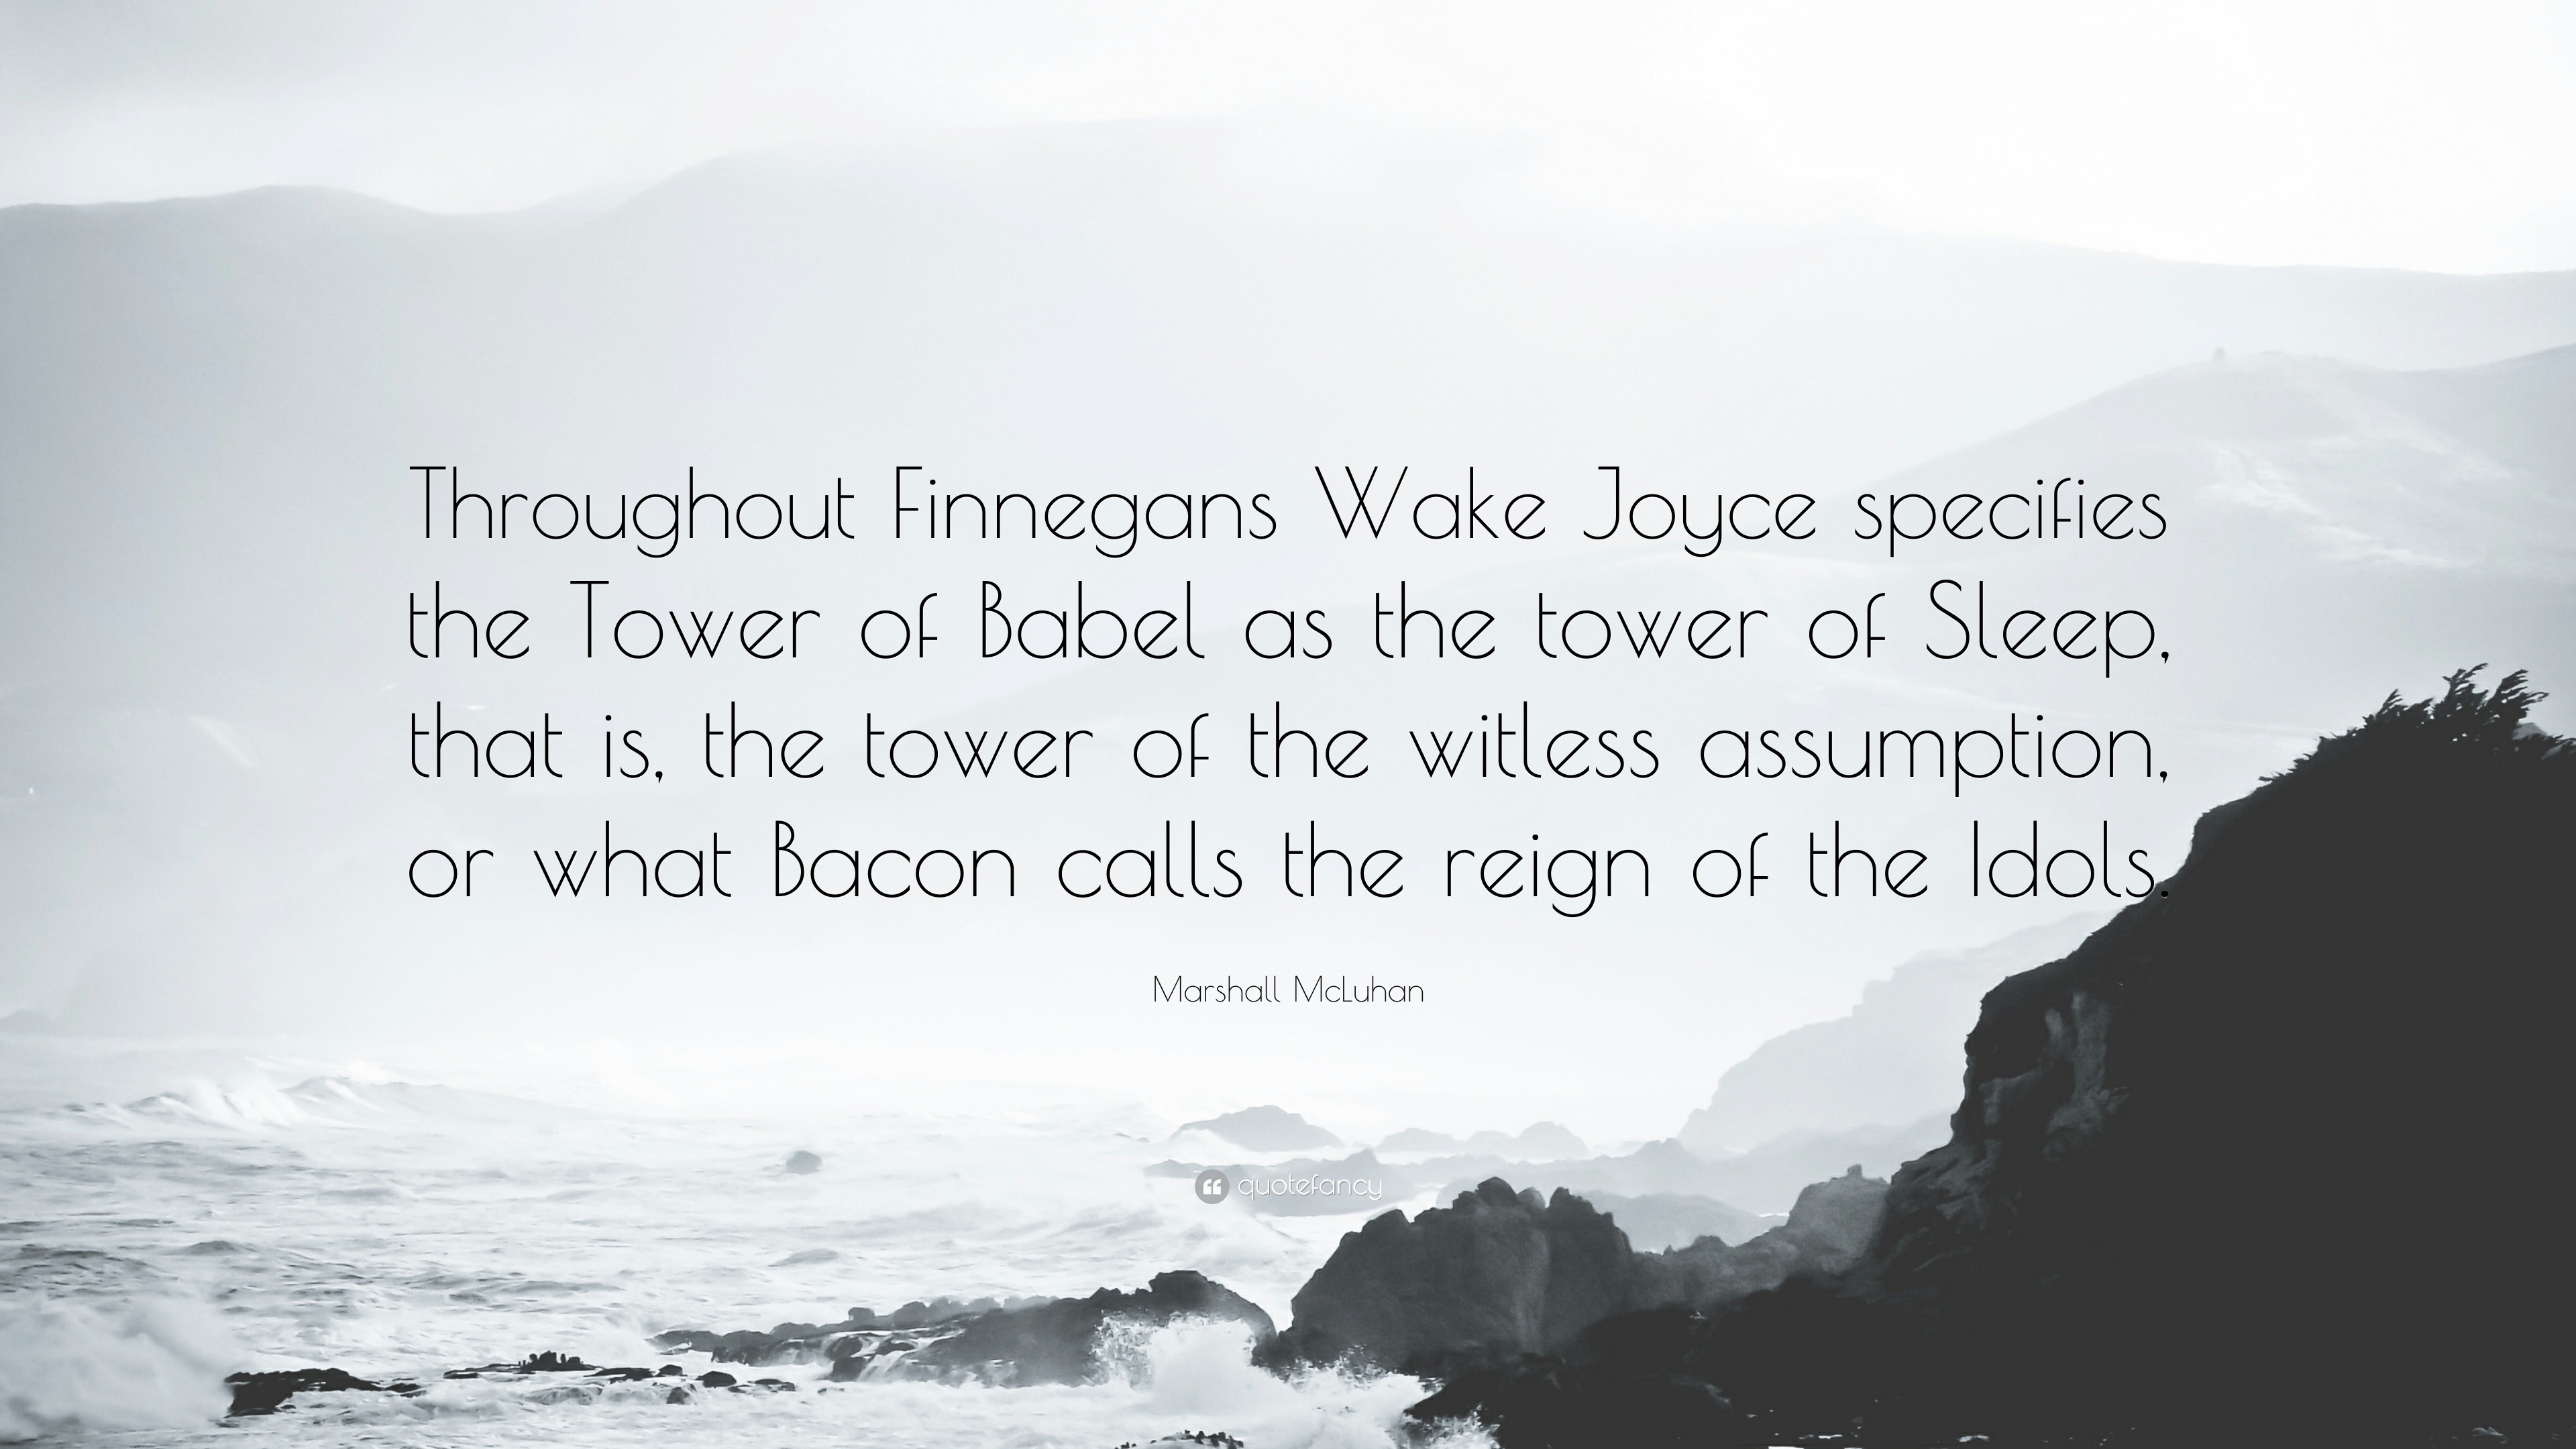 Marshall Mcluhan Quote Throughout Finnegans Wake Joyce Specifies The Tower Of Babel As The Tower Of Sleep That Is The Tower Of The Witless As